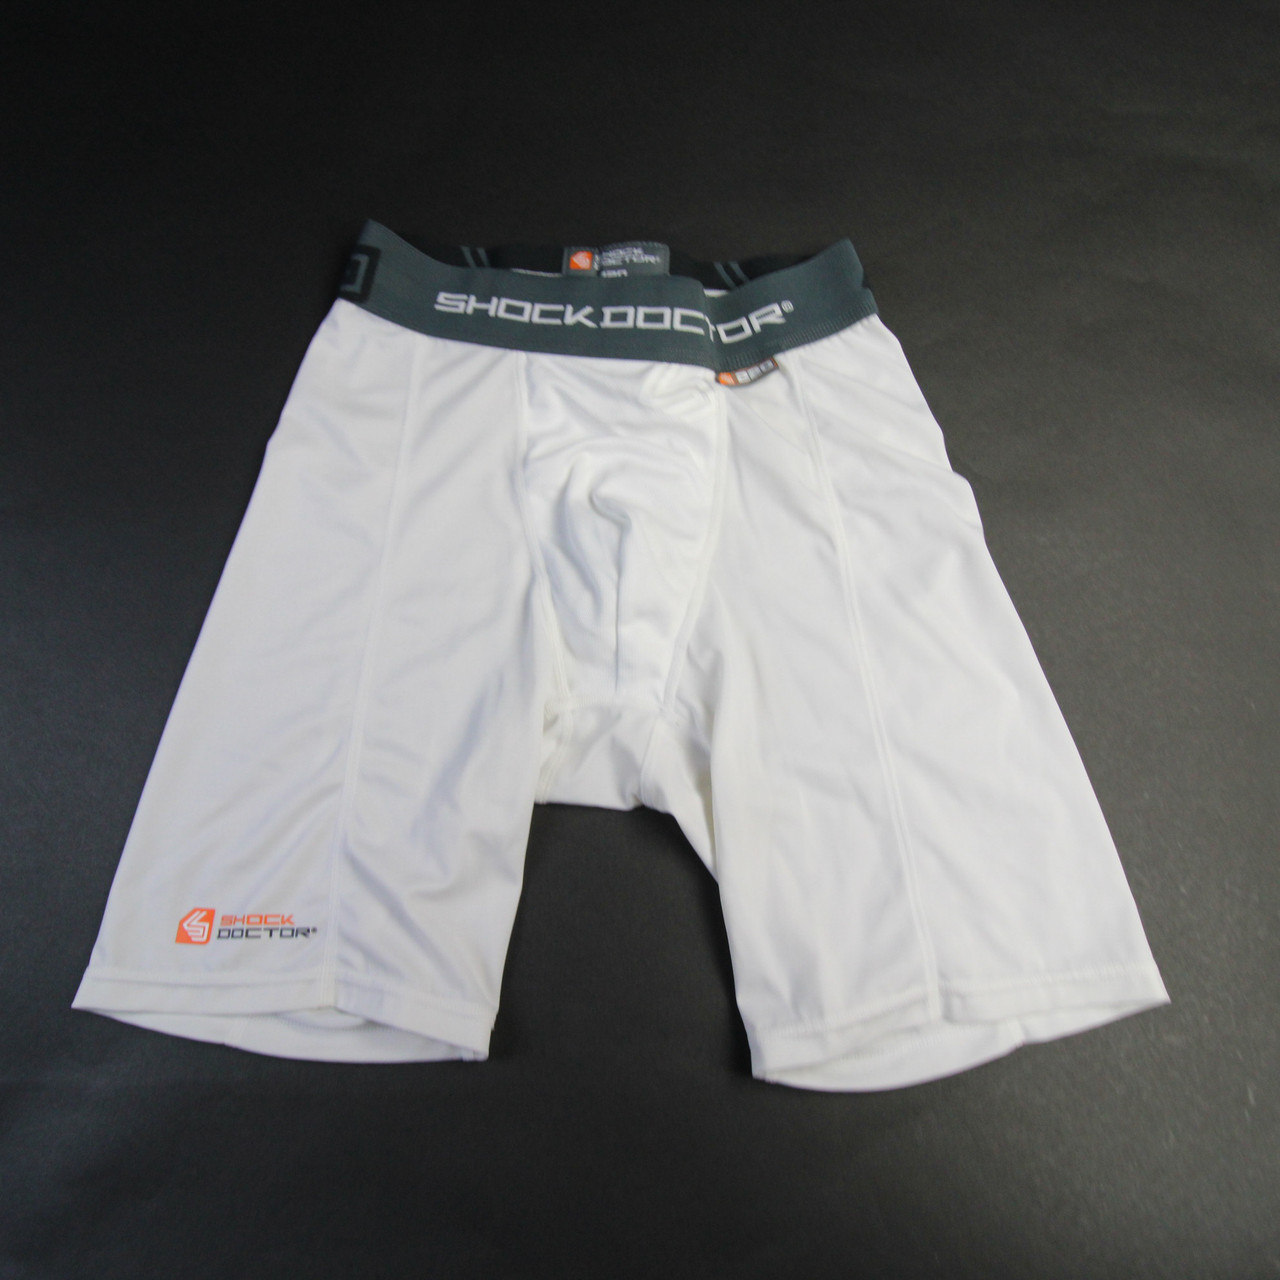 Shock Doctor Compression Shorts Men's White/Gray Used XL 741